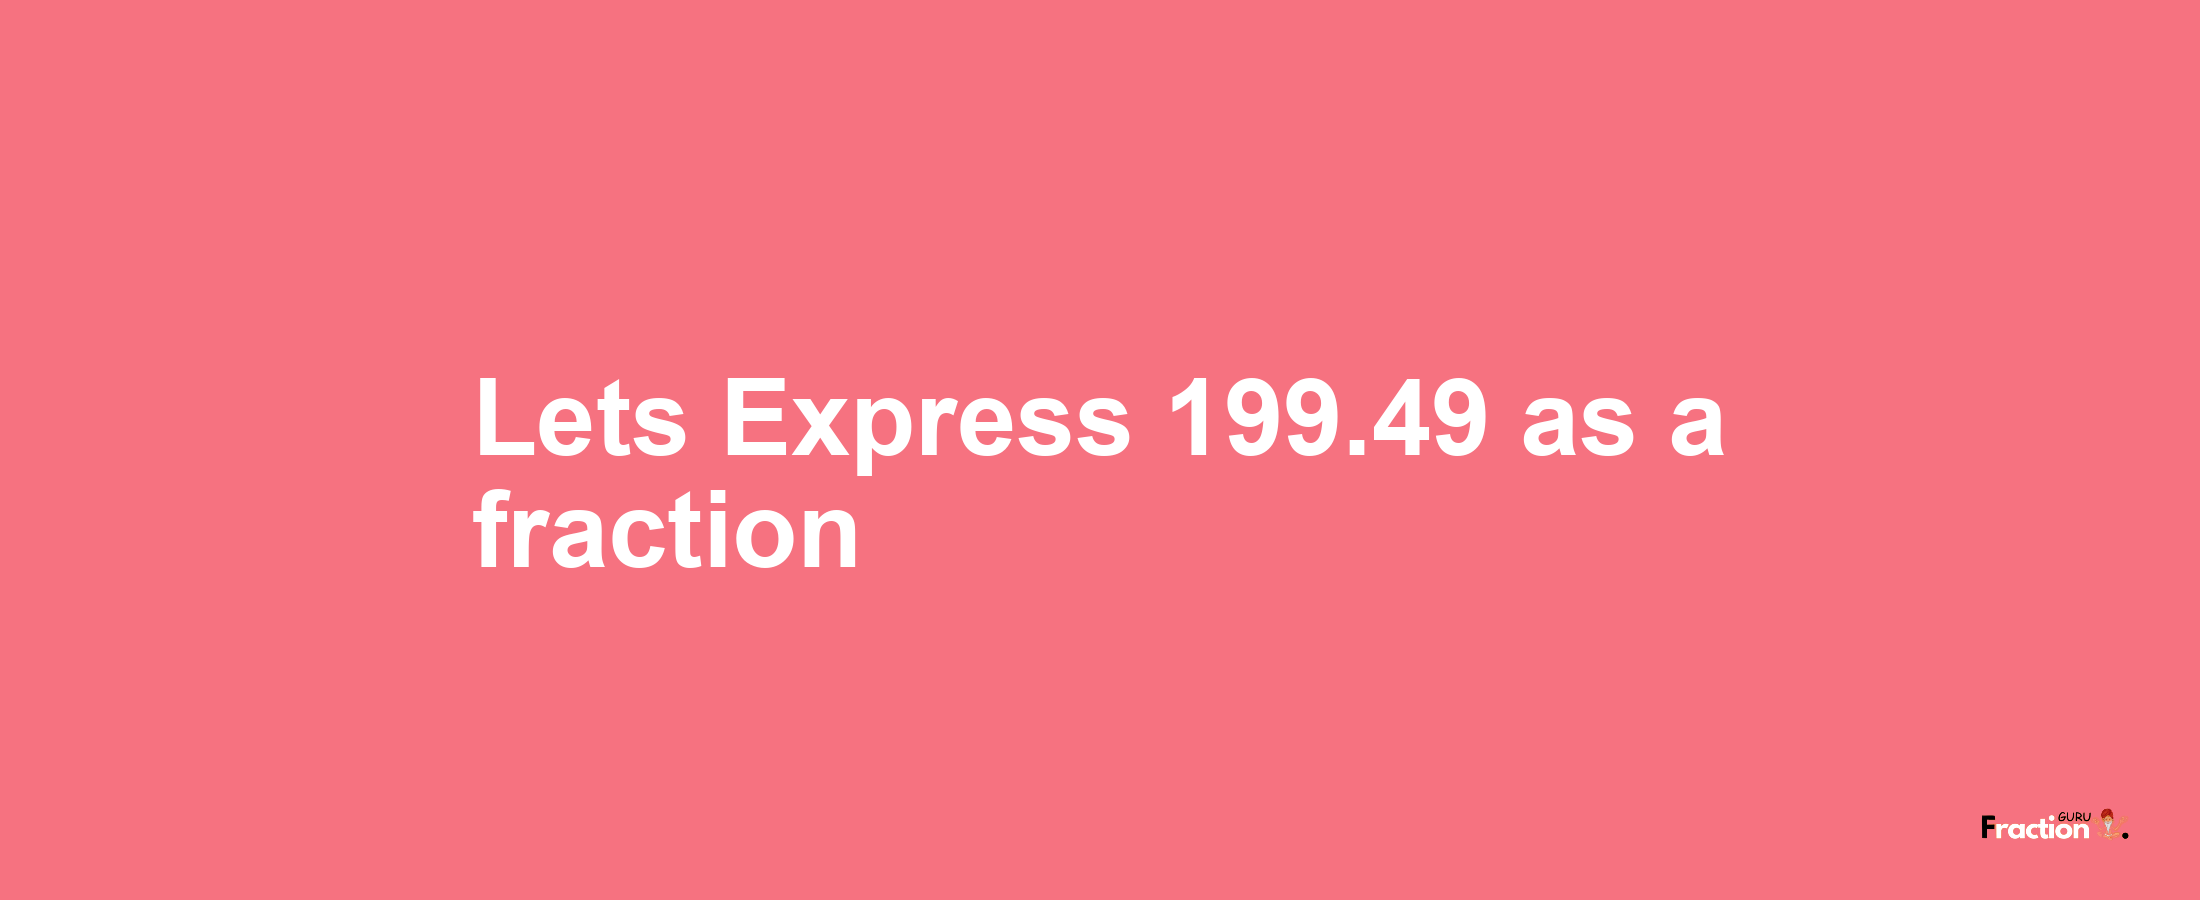 Lets Express 199.49 as afraction